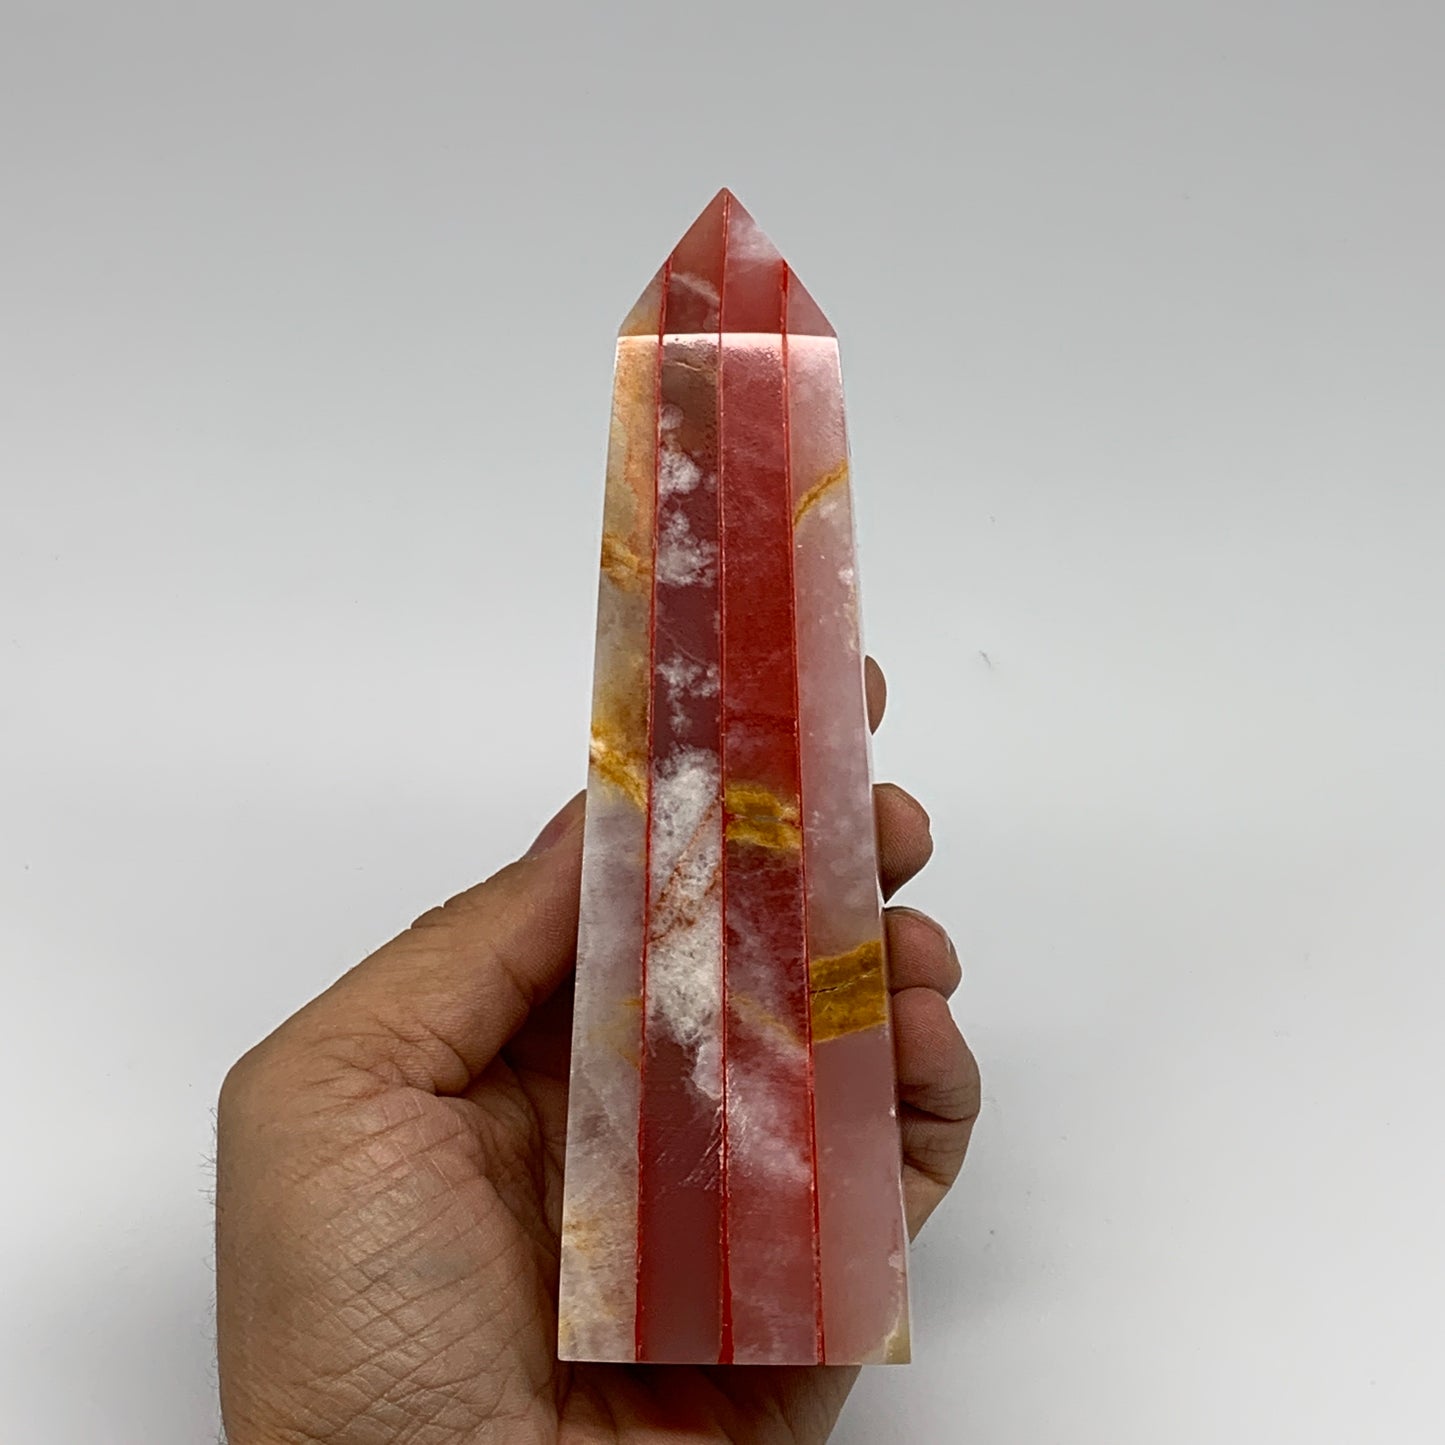 489.5g, 5.9"x1.6"x1.7" Dyed/Heated Calcite Point Tower Obelisk Crystal, B24984